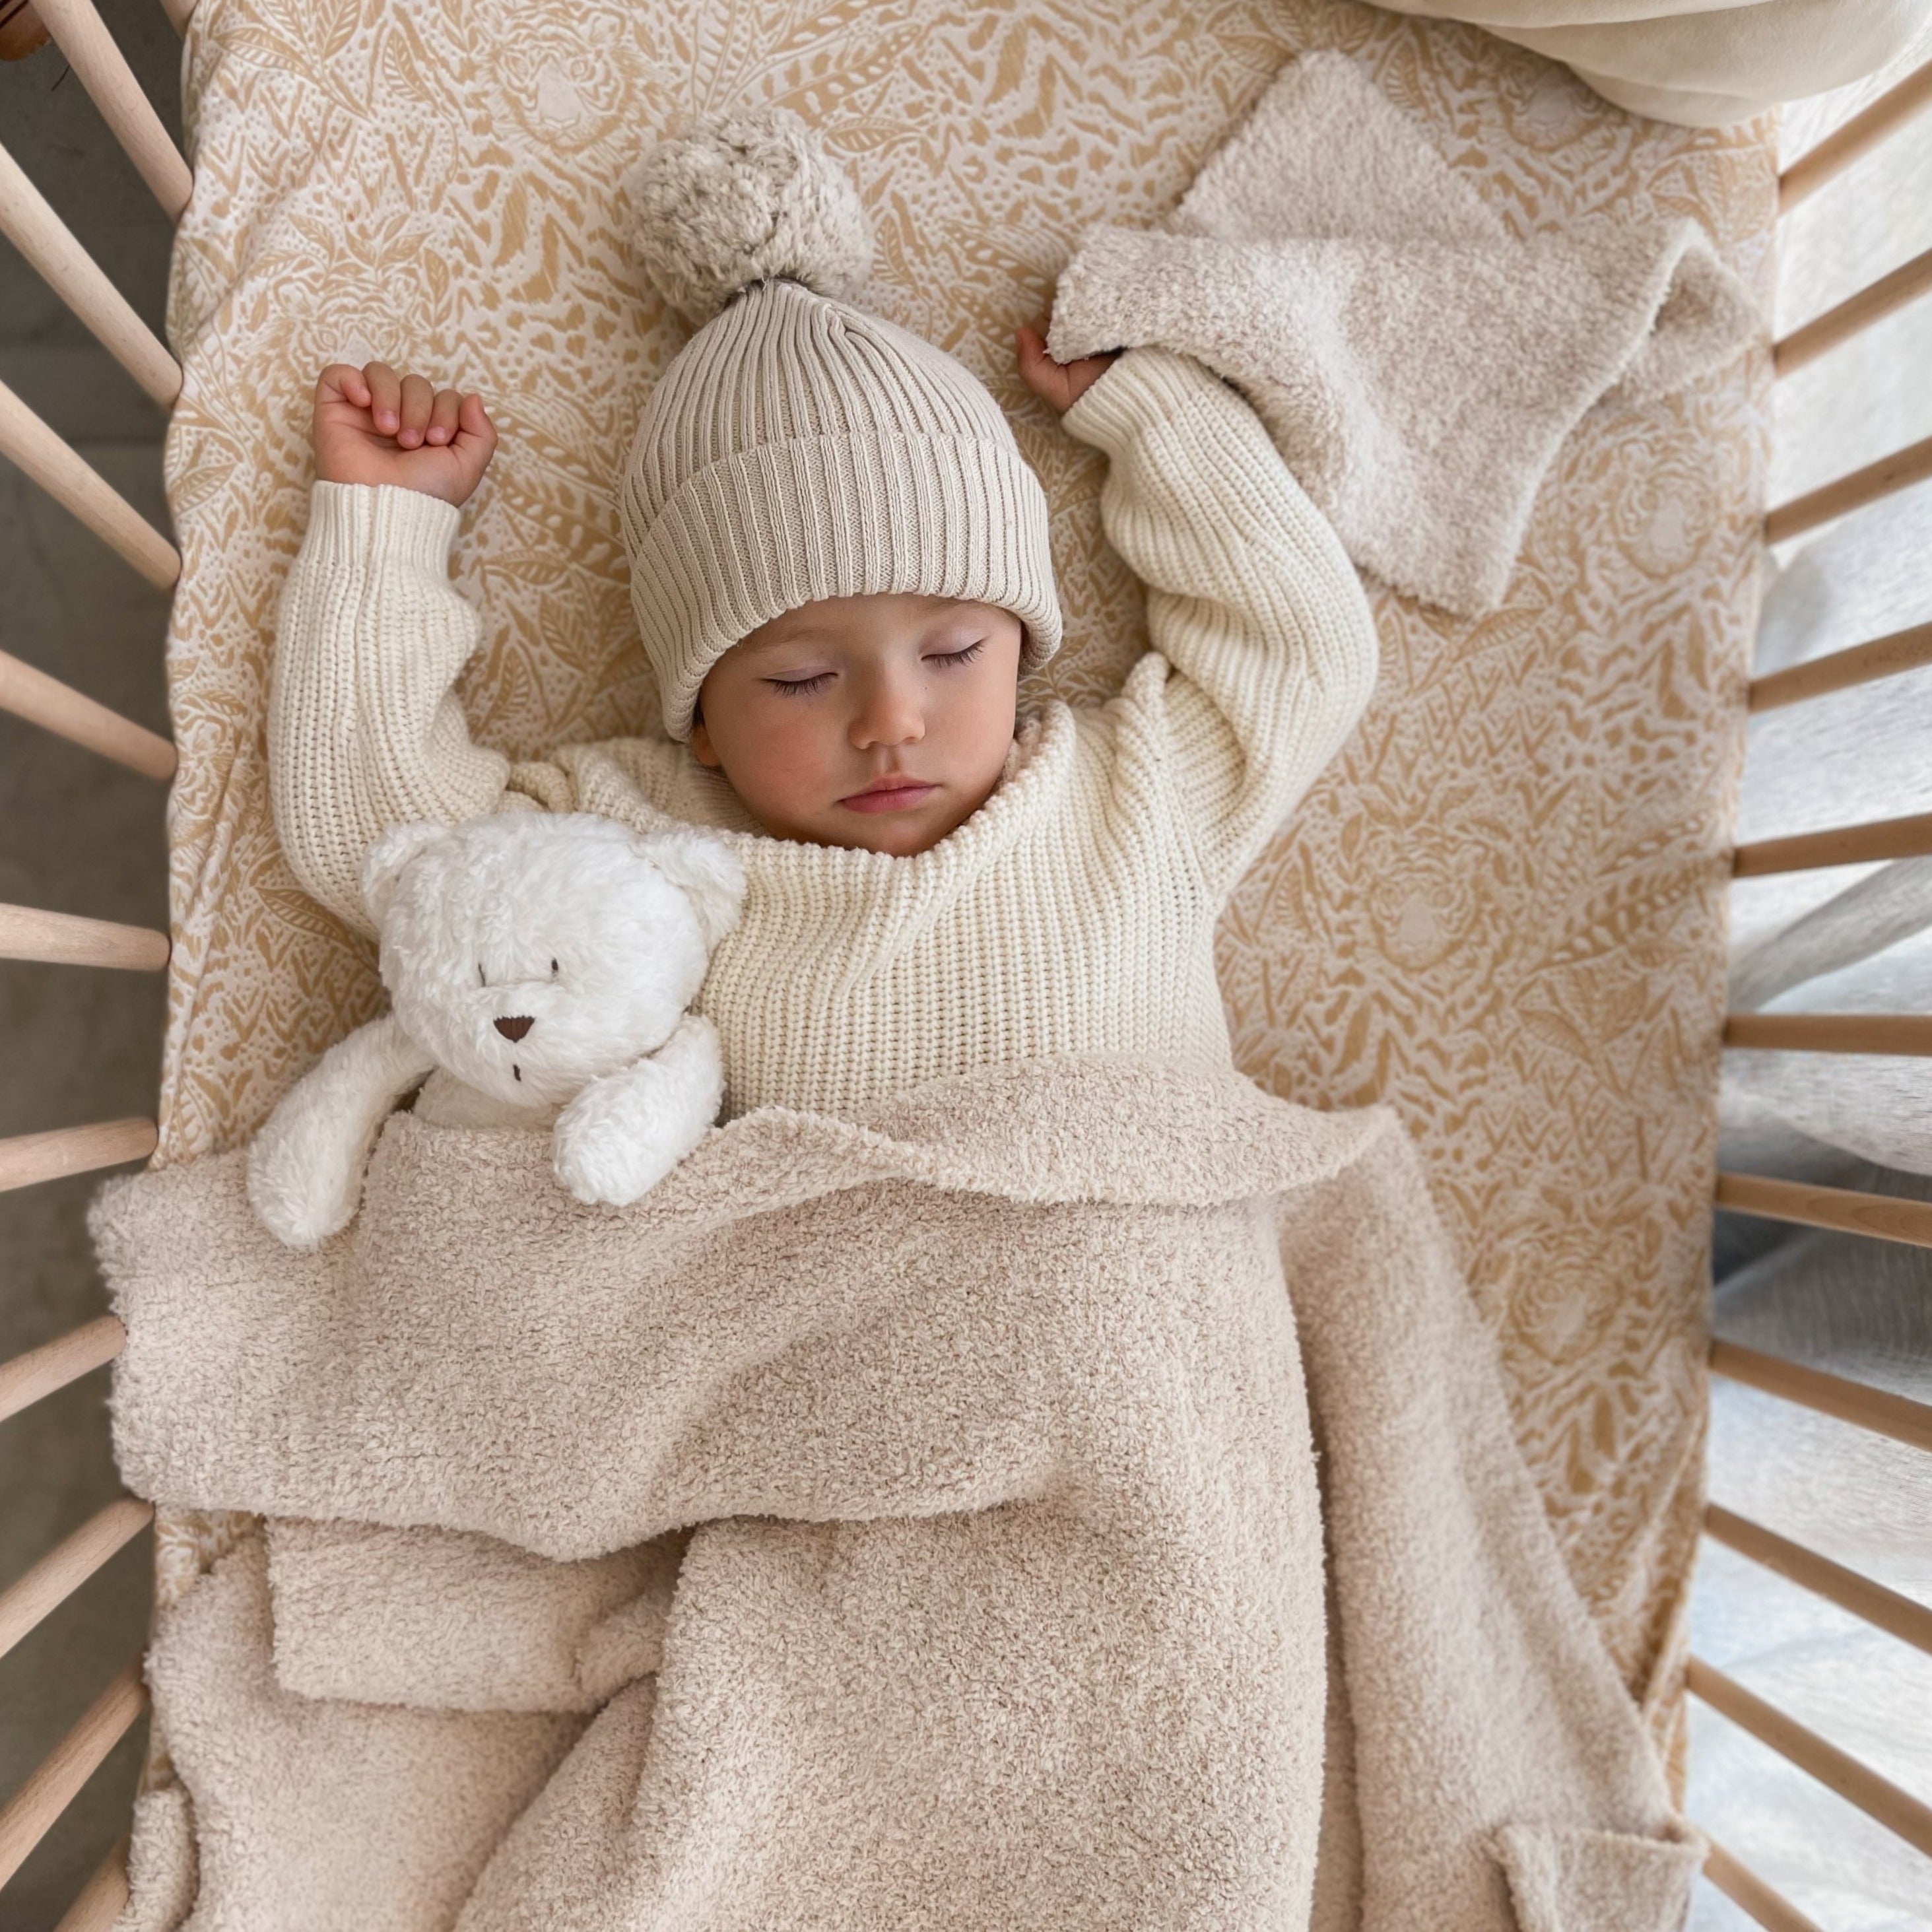 Baby in a cot with cozy neutral blanket